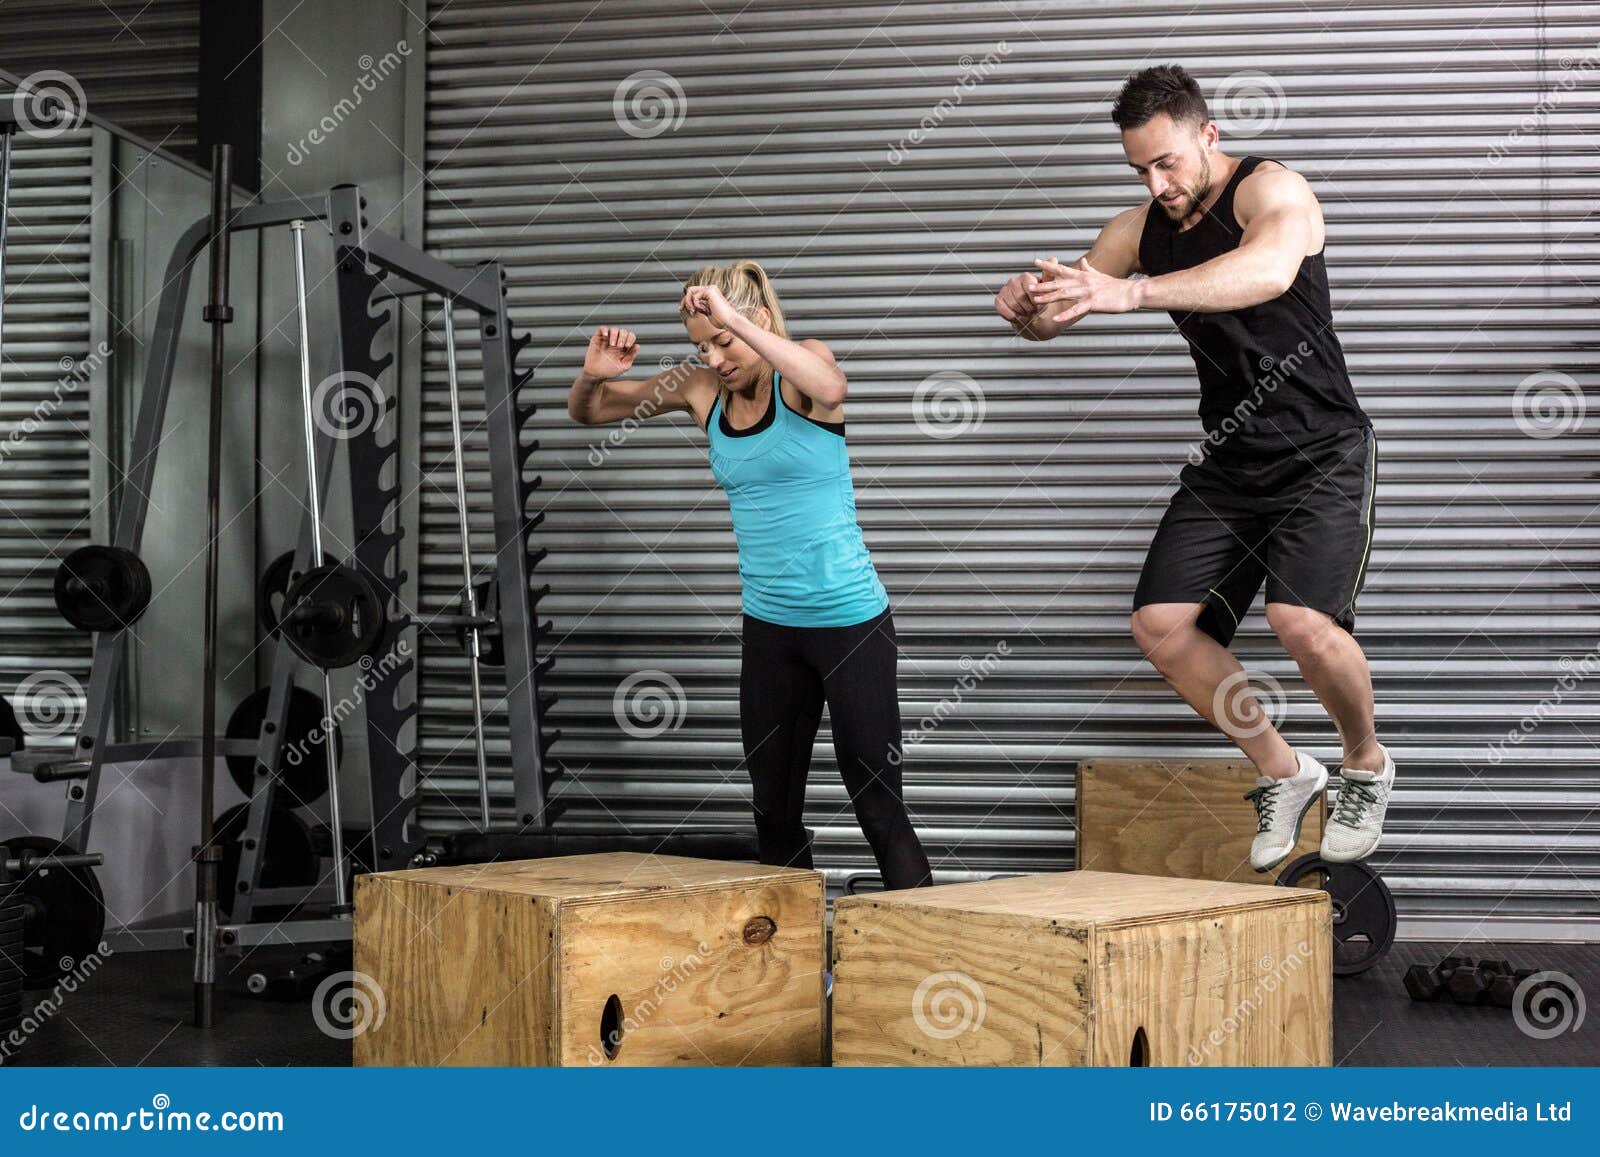 1,126 Box Fitness Couple Stock Photos - Free & Royalty-Free Stock Photos  from Dreamstime